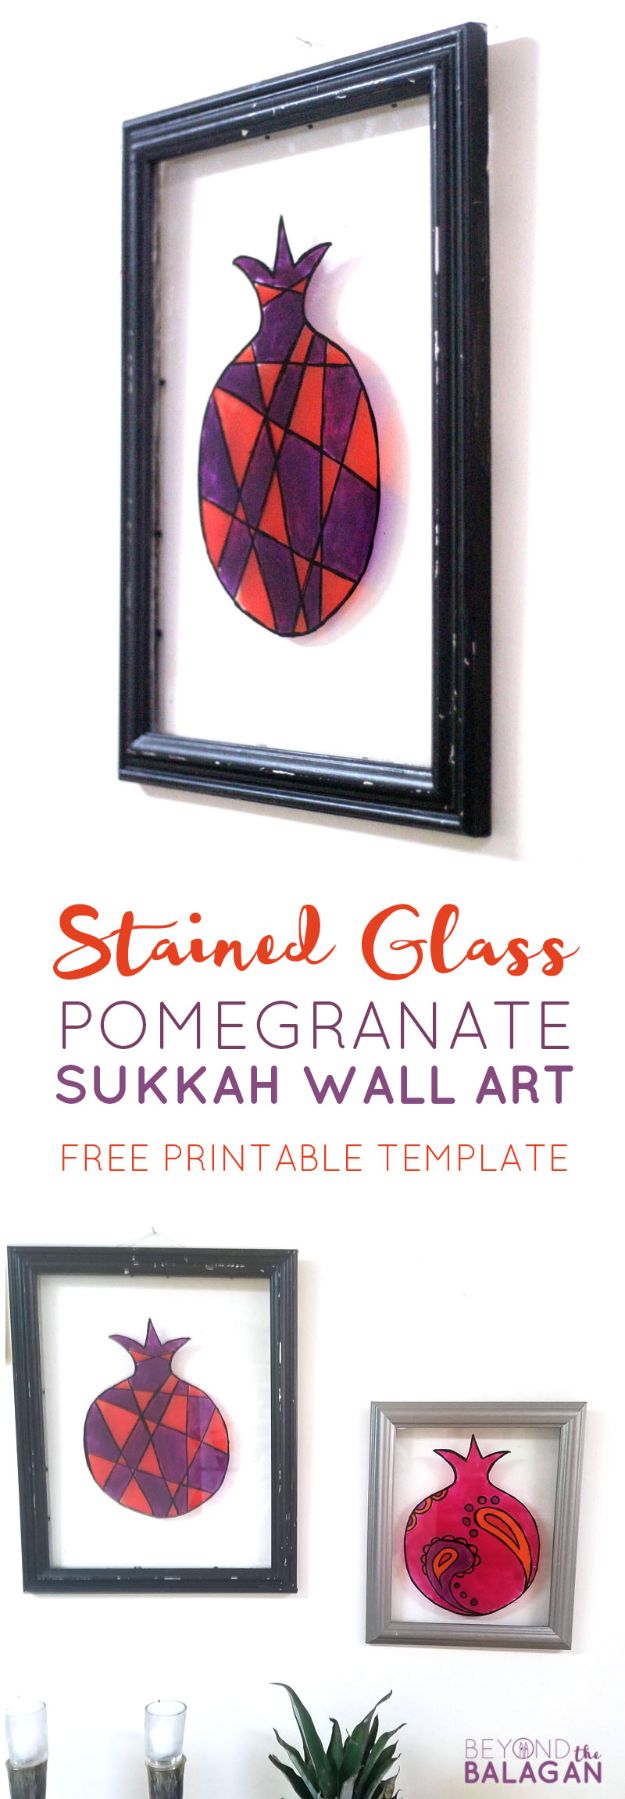 DIY Wall Art Ideas for Teens - Stained Glass Pomegranate Sukkah Wall Art - Teen Boy and Girl Bedroom Wall Decor Ideas - Cheap Canvas Paintings and Wall Hangings For Room Decoration